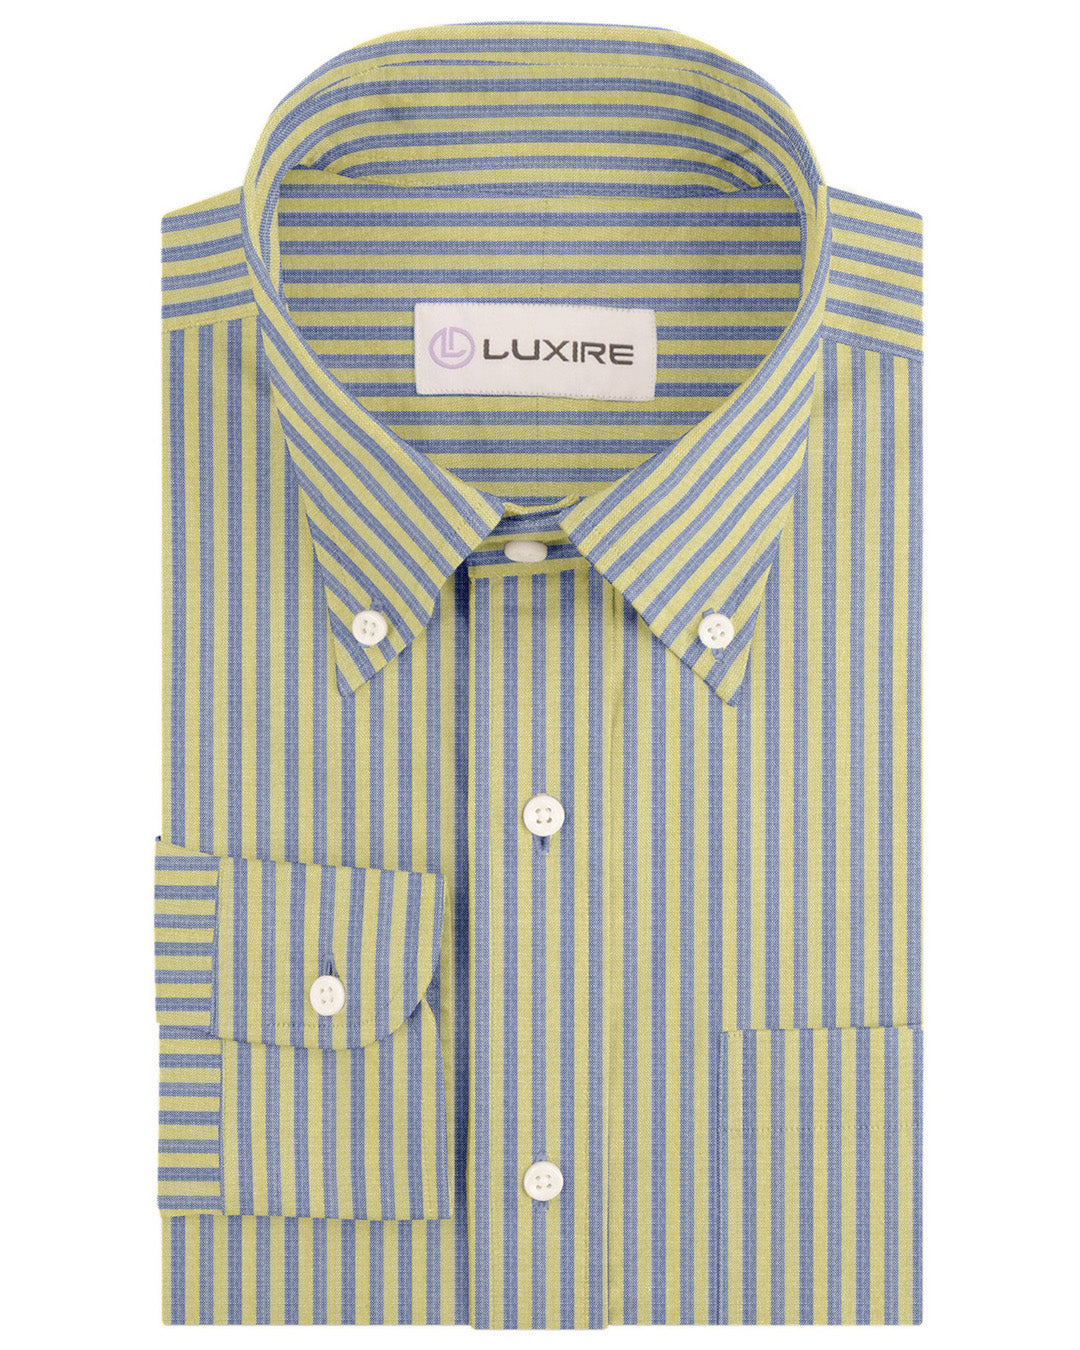 Front view of custom linen shirt for men in yellow and blue dress stripes